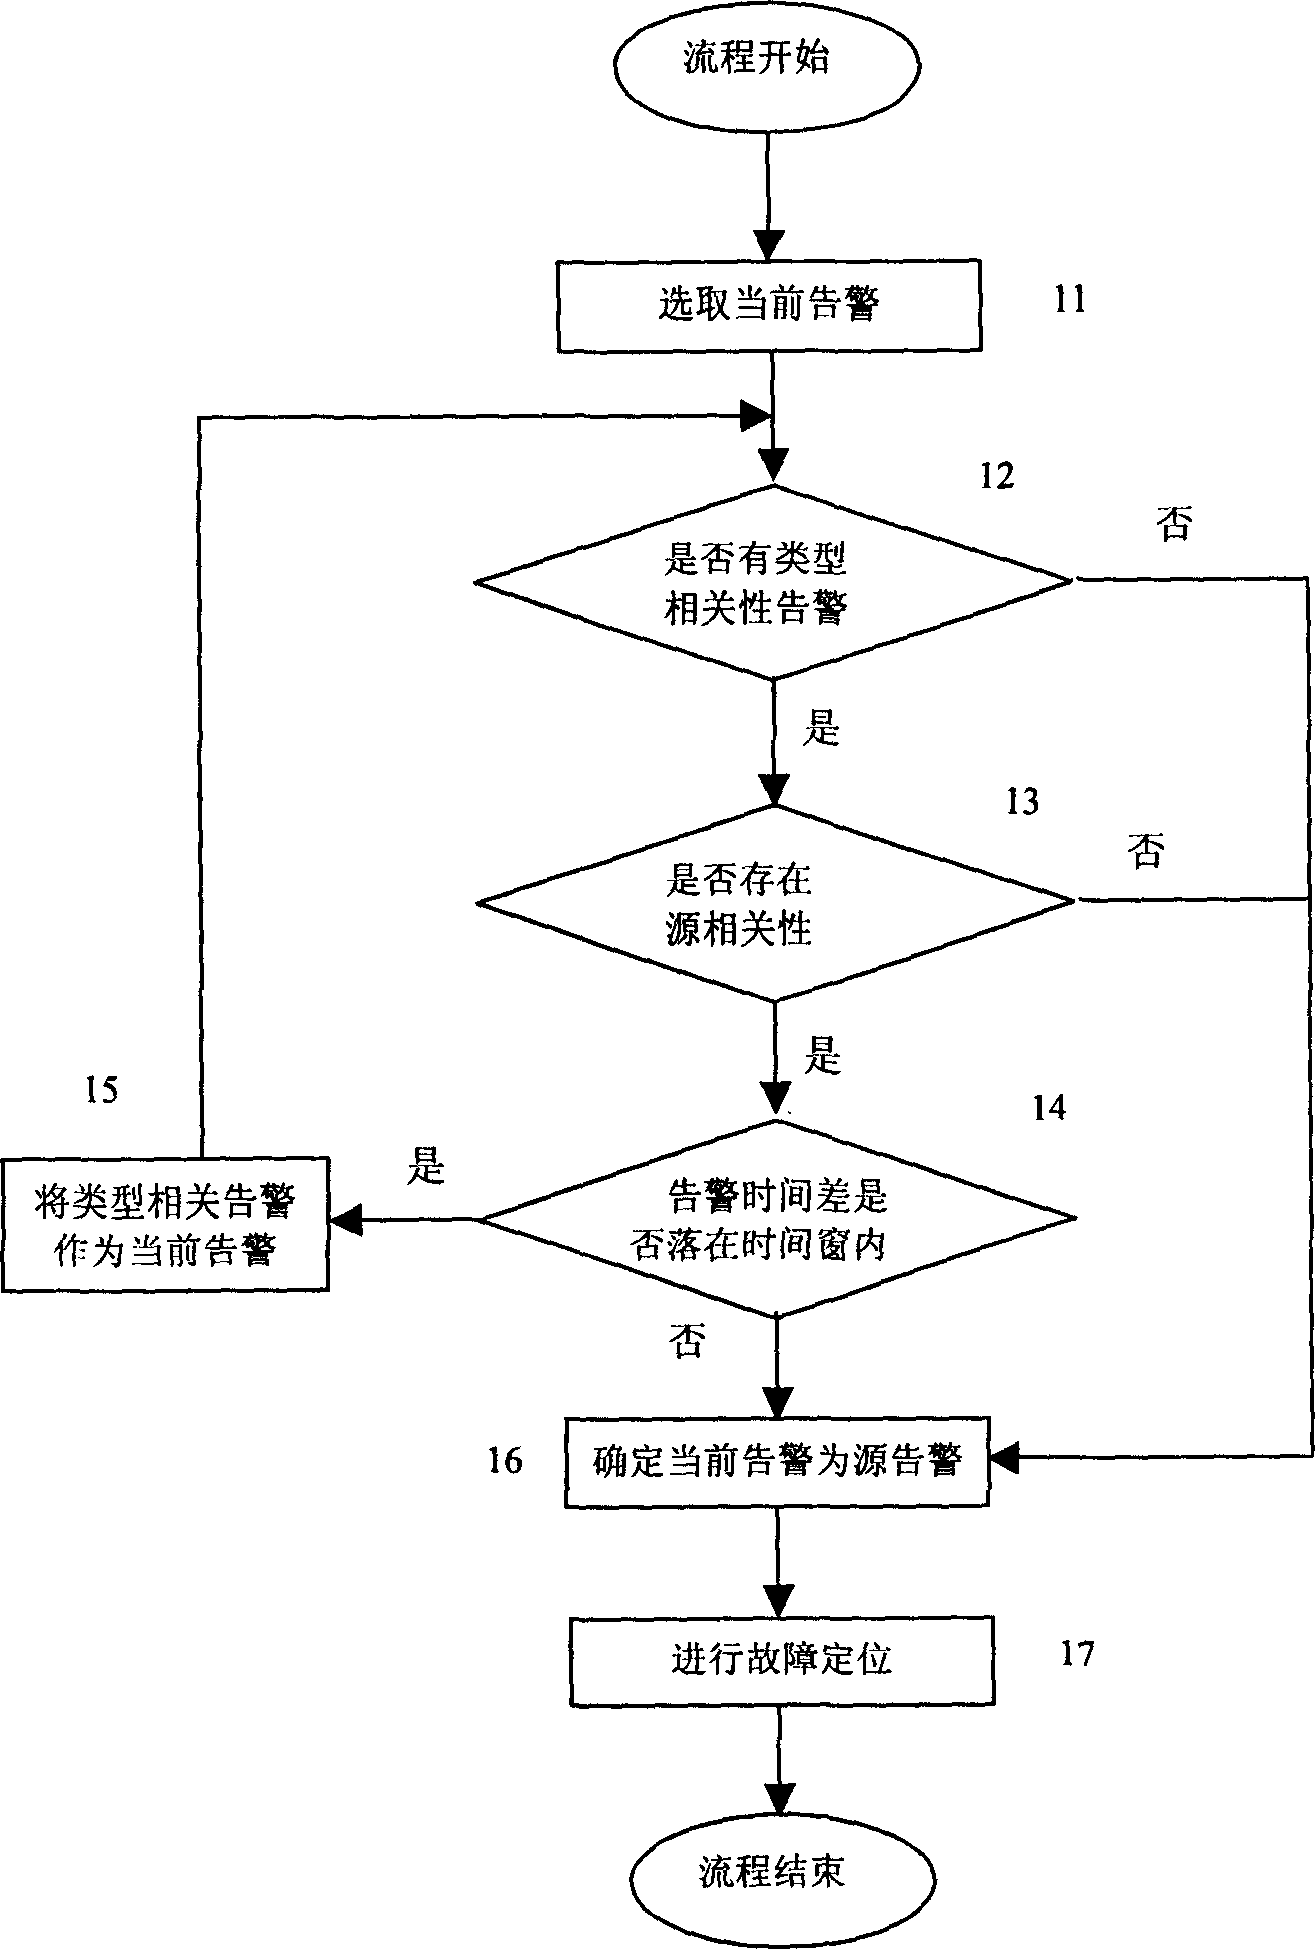 Fault positioning method and device